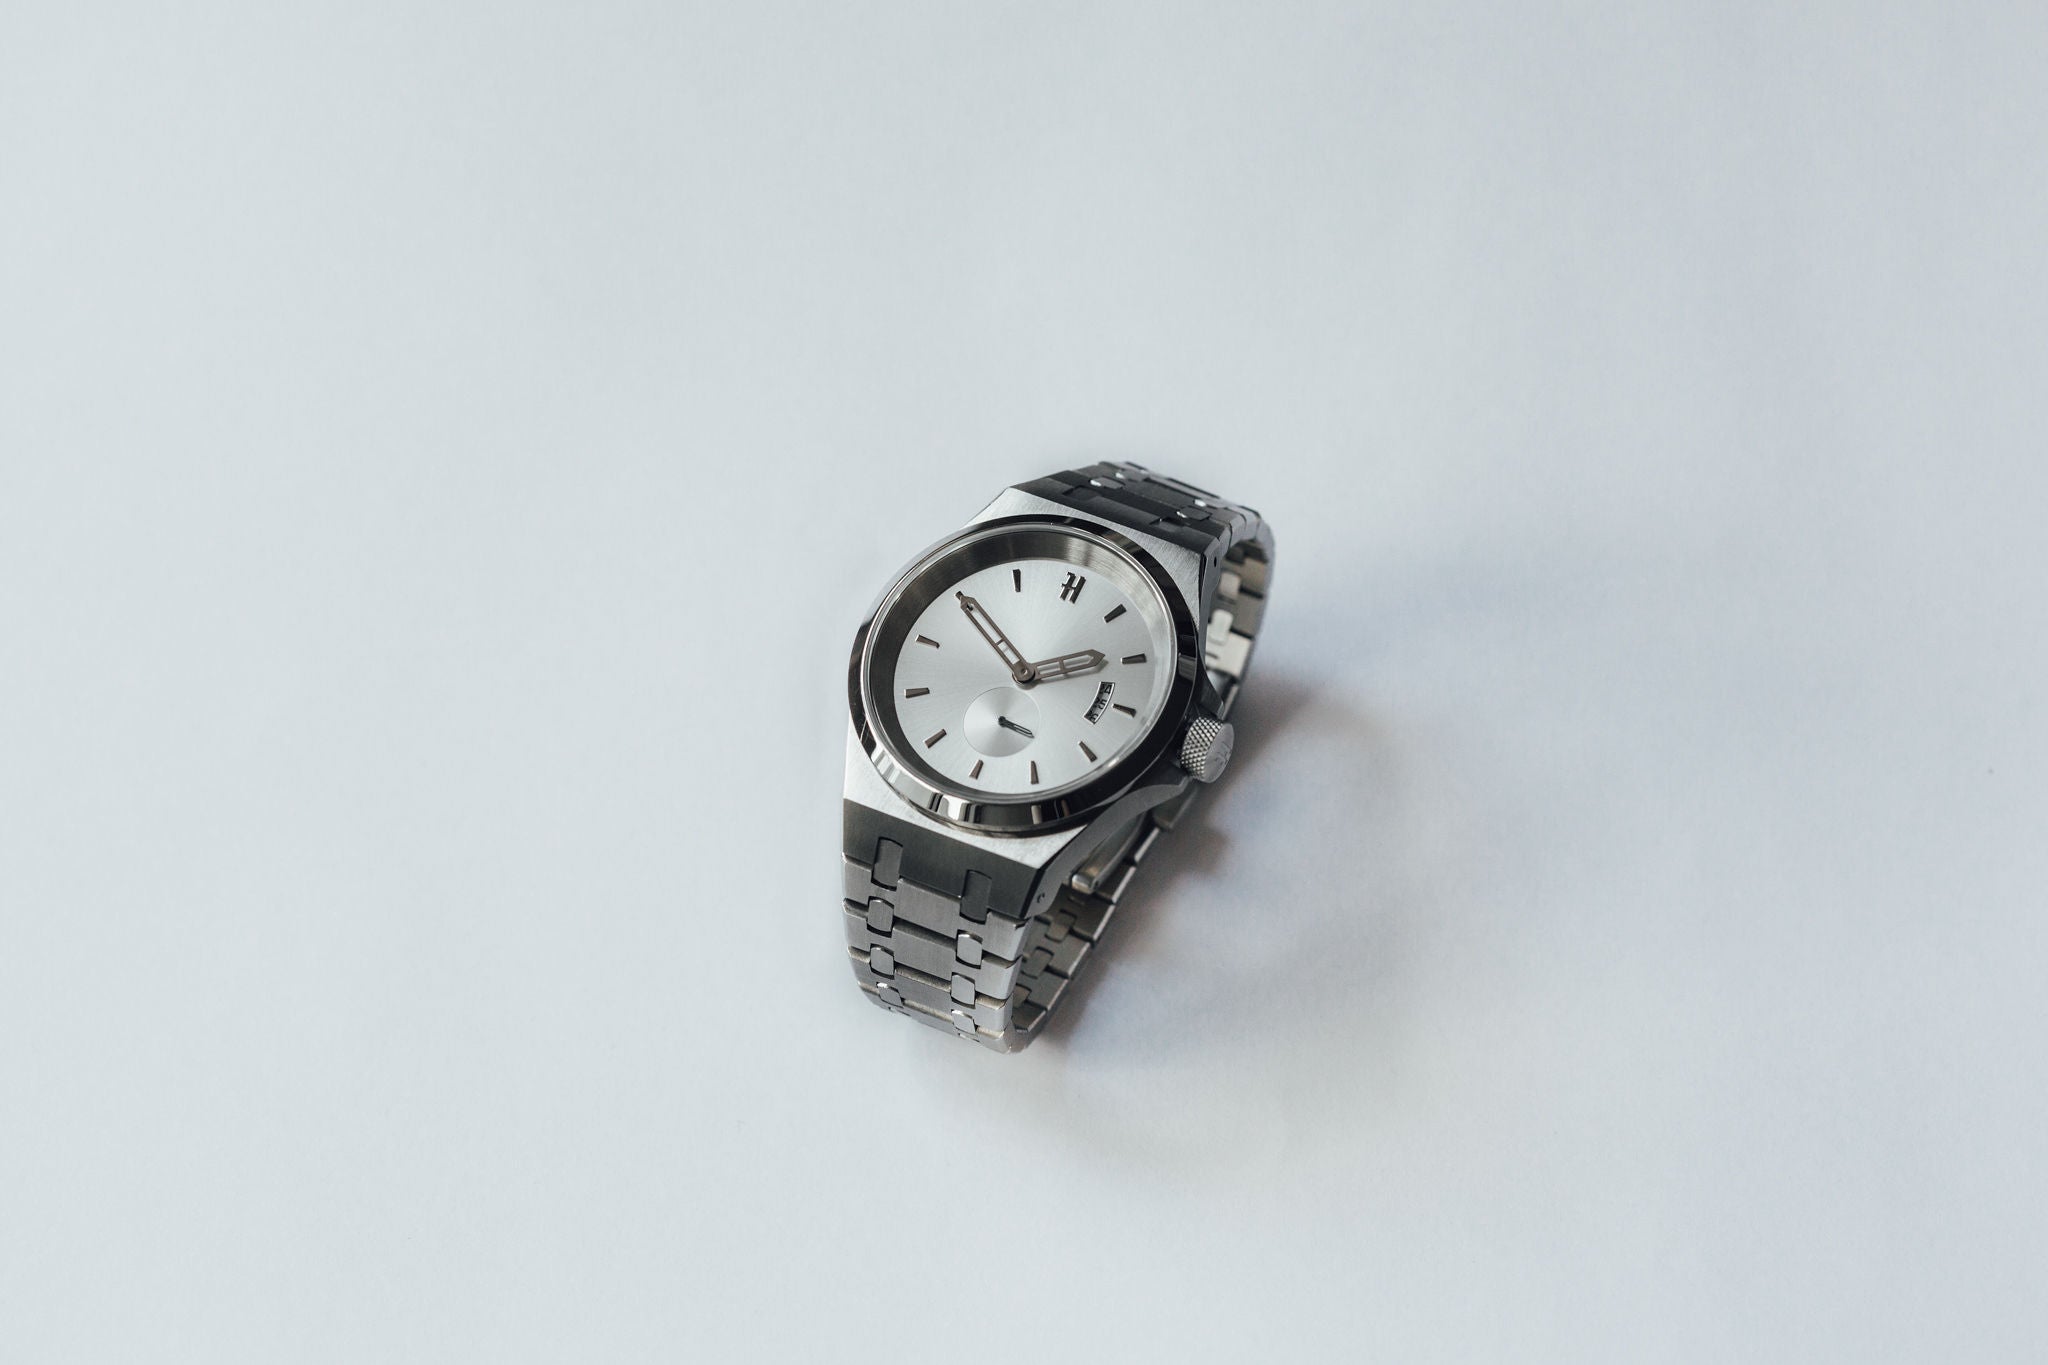 THE ACE - SILVER MENS WATCH